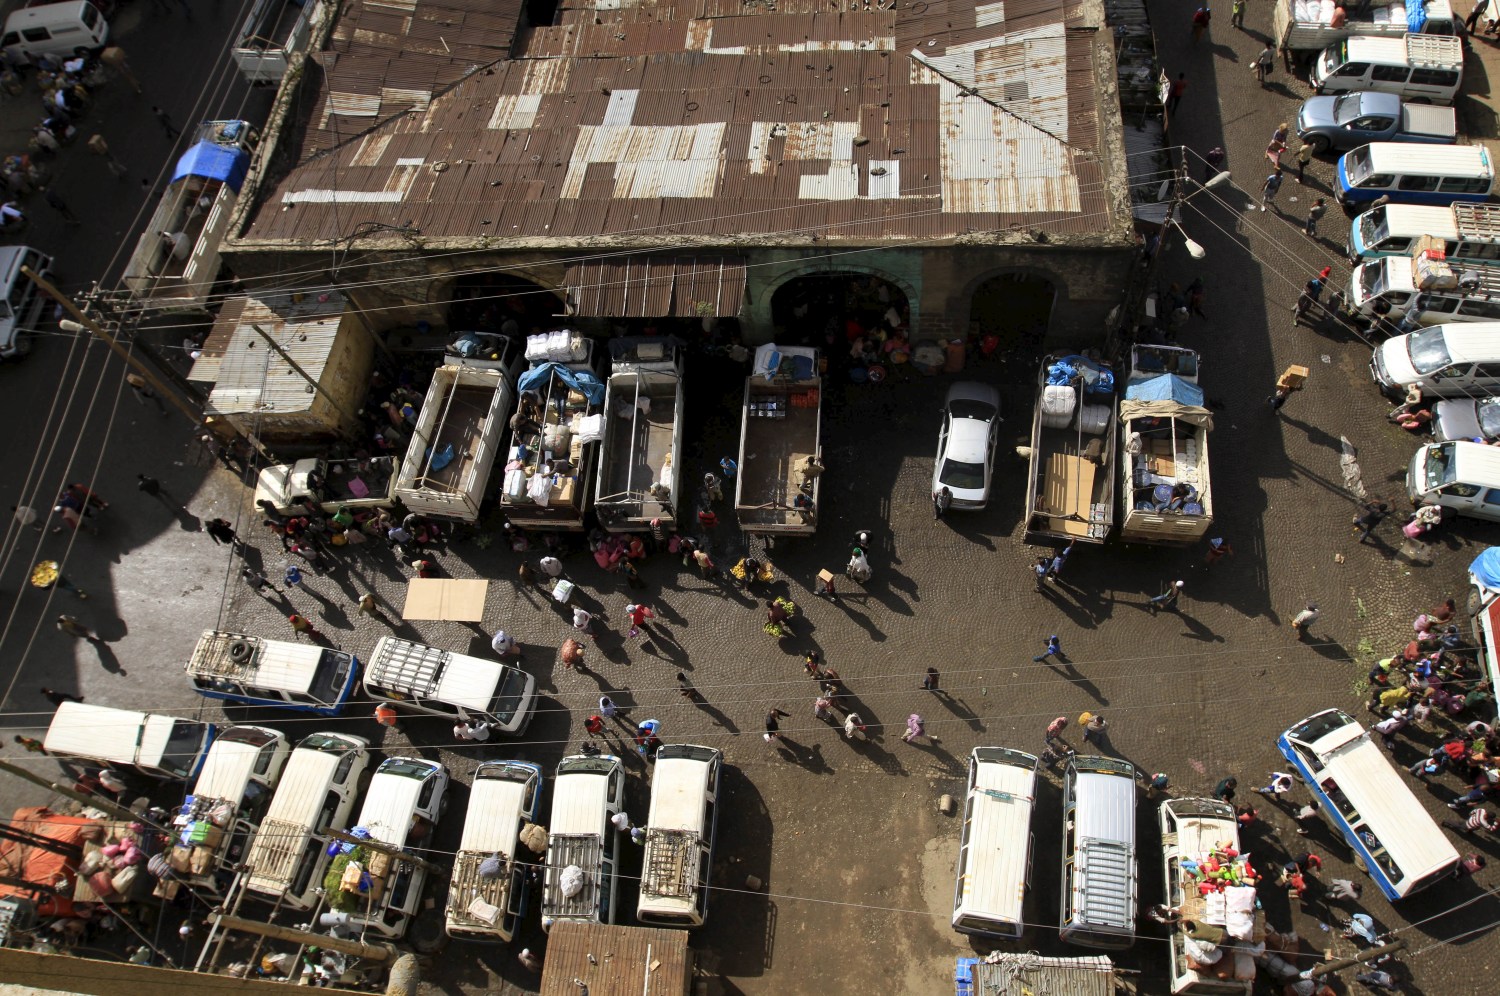 Trucks and commericial vehicles are unloaded at the Mercato market in Addis Ababa September 11, 2015. Addis Ababa's 'Mercato' - Italian for 'market' - is reputedly the biggest open-air market in Africa, lying in the west of the capital. Supermarkets have sprouted across the city as the metropolis has expanded with Ethiopia's booming economy, but Mercato remains a popular destination for shoppers seeking clothing, electronics and a huge range of other items. It has been around for as long as the city, which was founded at the end of the 19th century, but it took its current form, and its name, from the Italians who invaded Ethiopia in 1935. The Italian occupation ended in 1941. Picture taken September 11, 2015.    REUTERS/Tiksa Negeri - GF10000267939